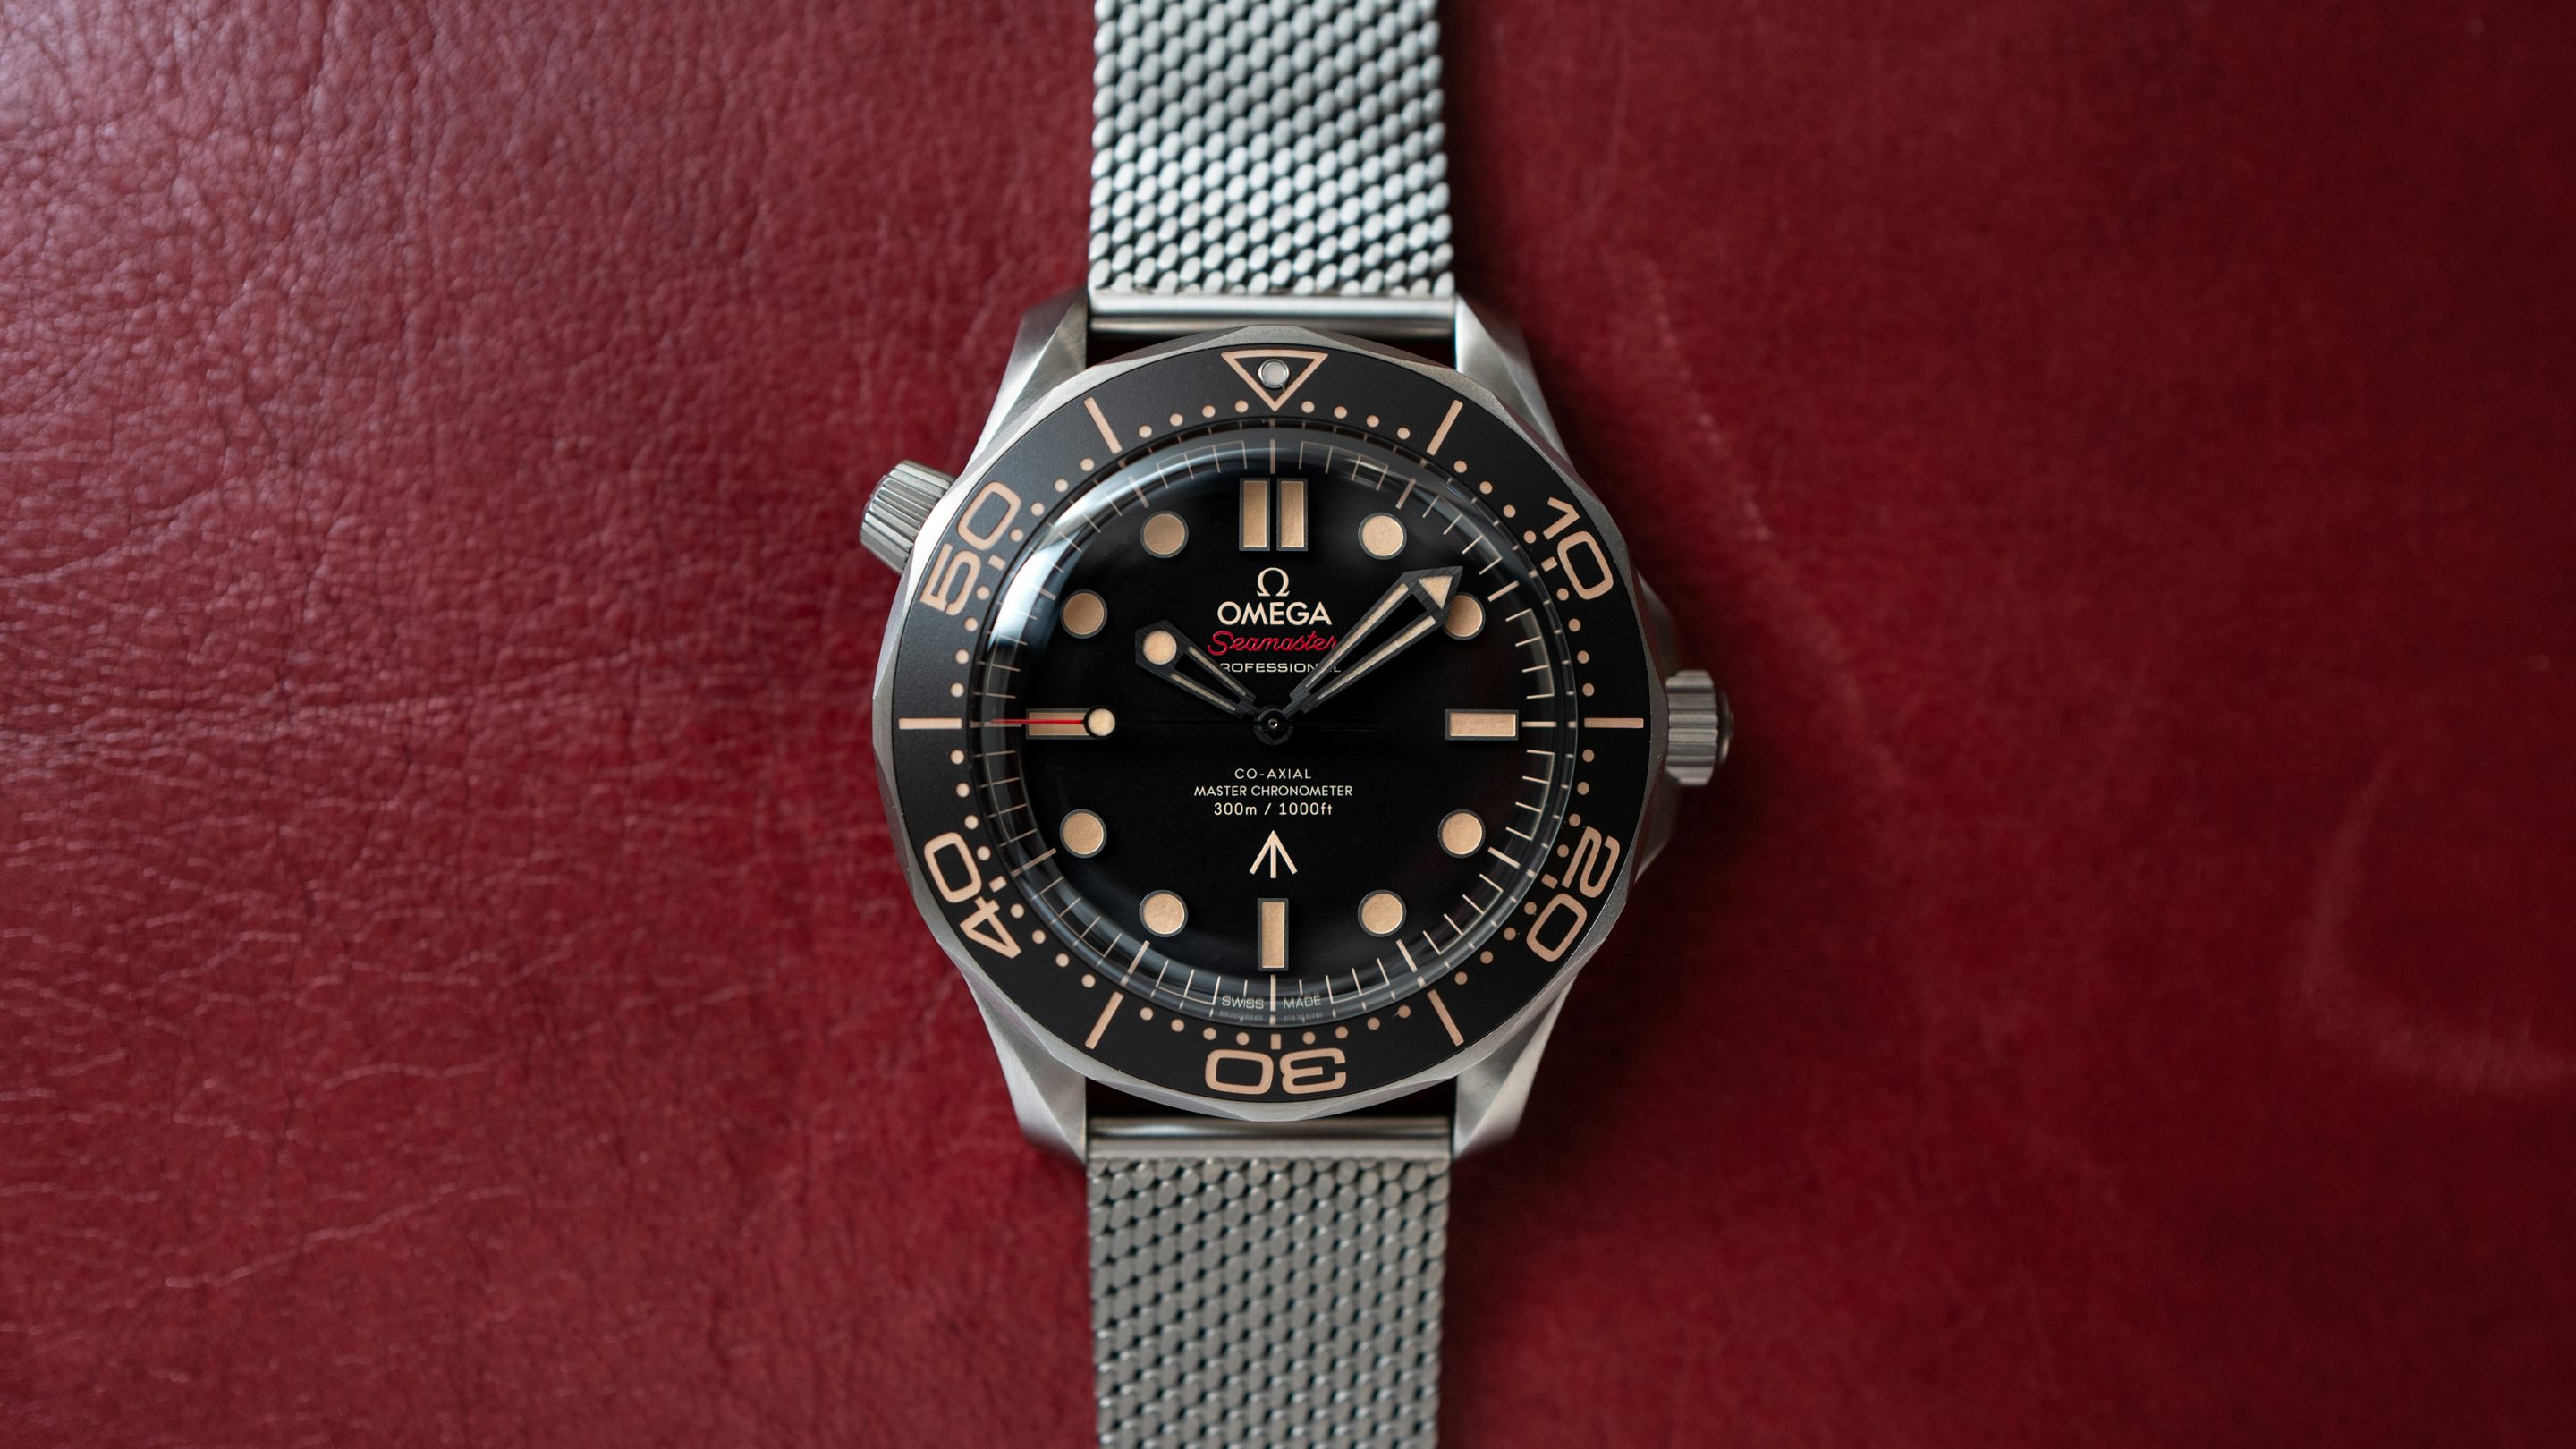 Introducing The Omega Seamaster Diver 300m 007 Edition Live Pics Pricing Hodinkee